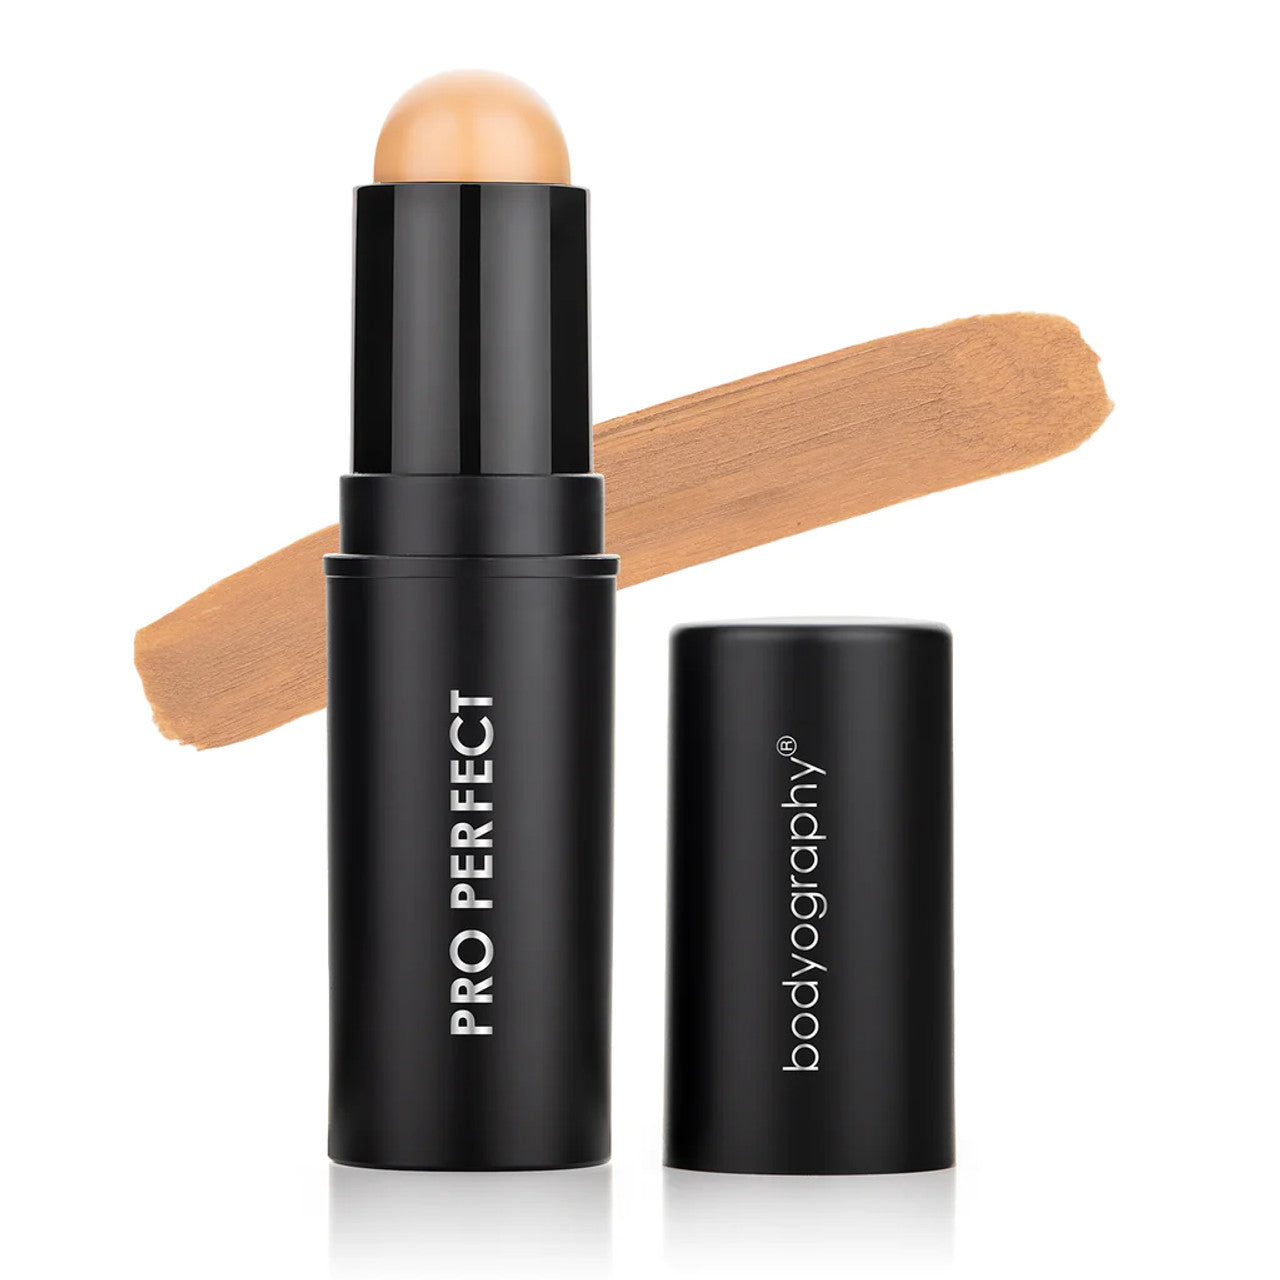 Bodyography Pro Perfect Foundation Stick - Golden - Med Warm-Yellow/Brown